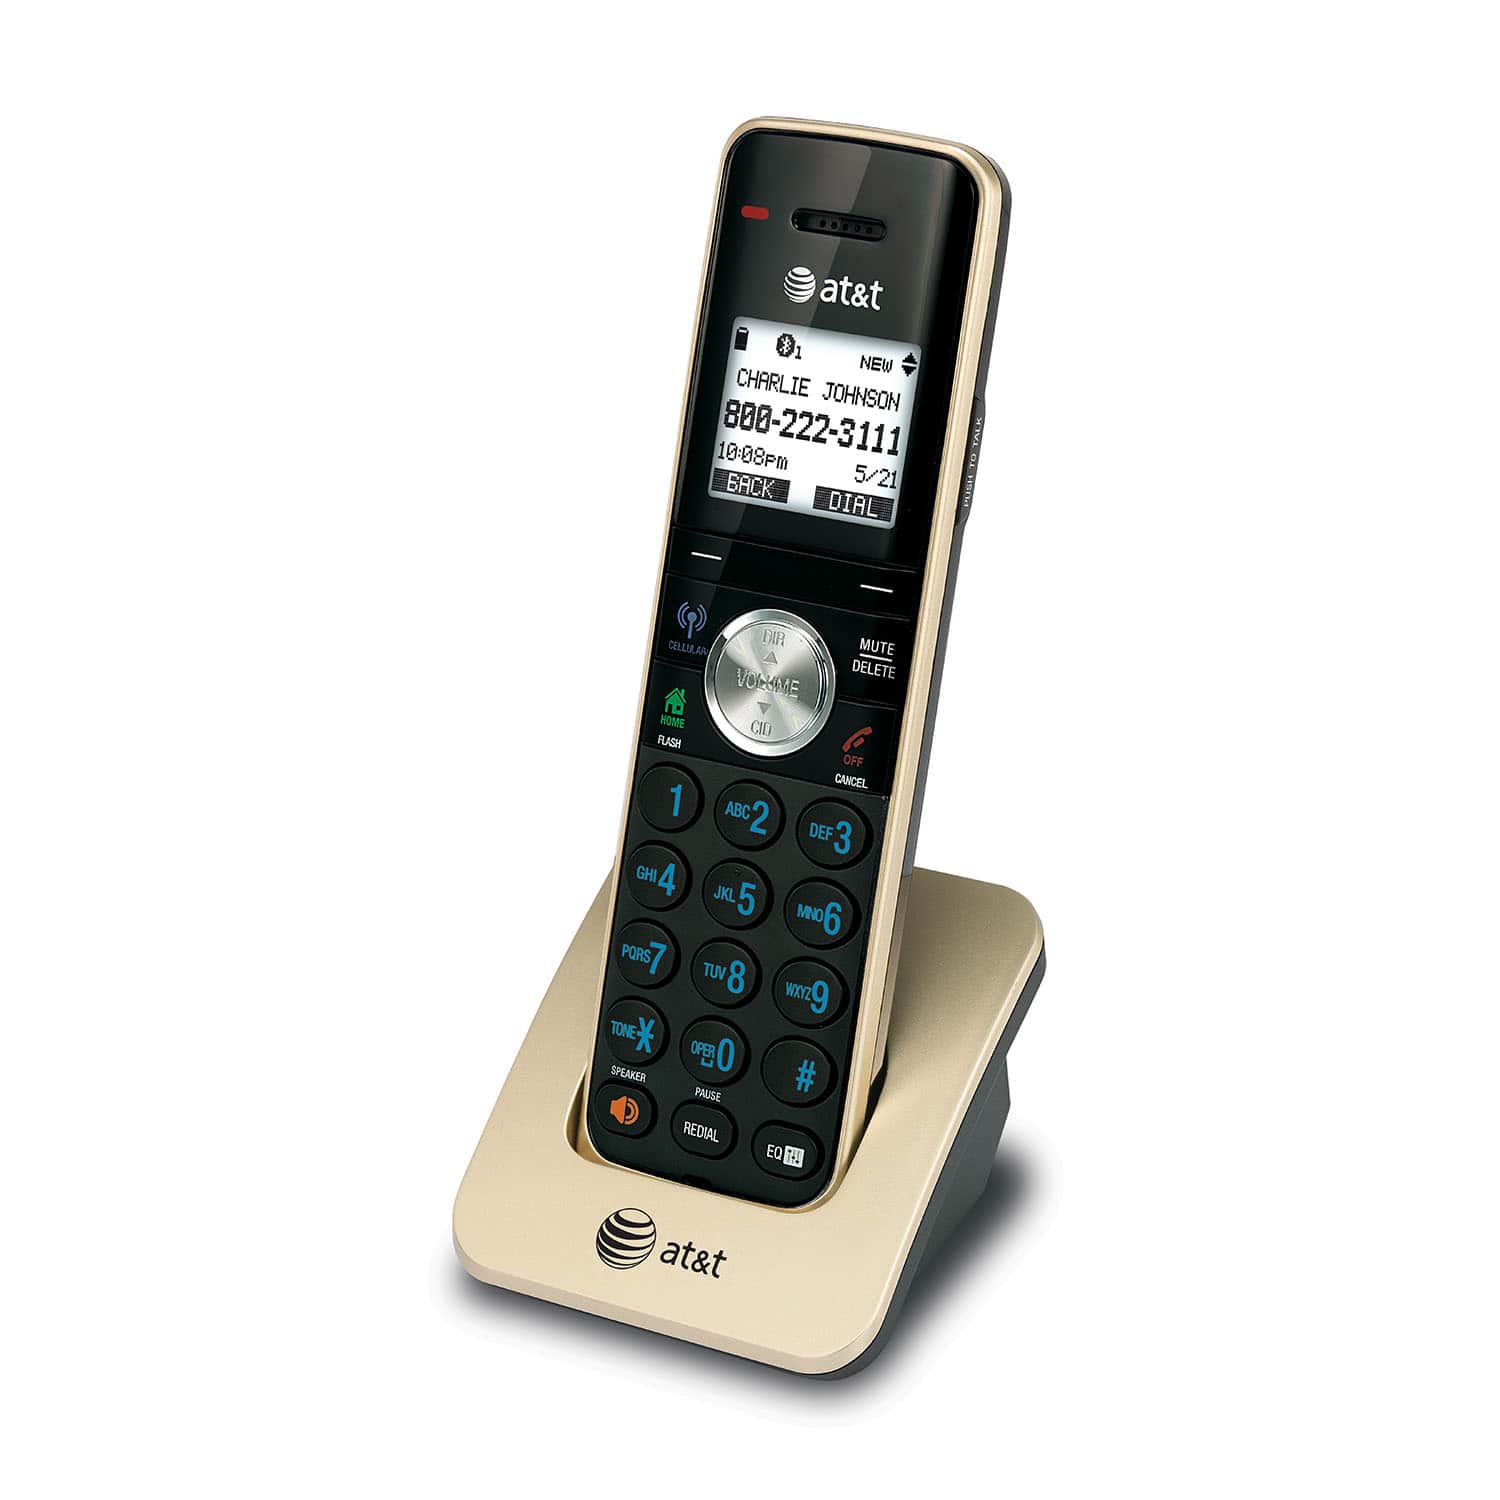 5 handset Connect to Cell™ answering system with caller ID/call waiting - view 6